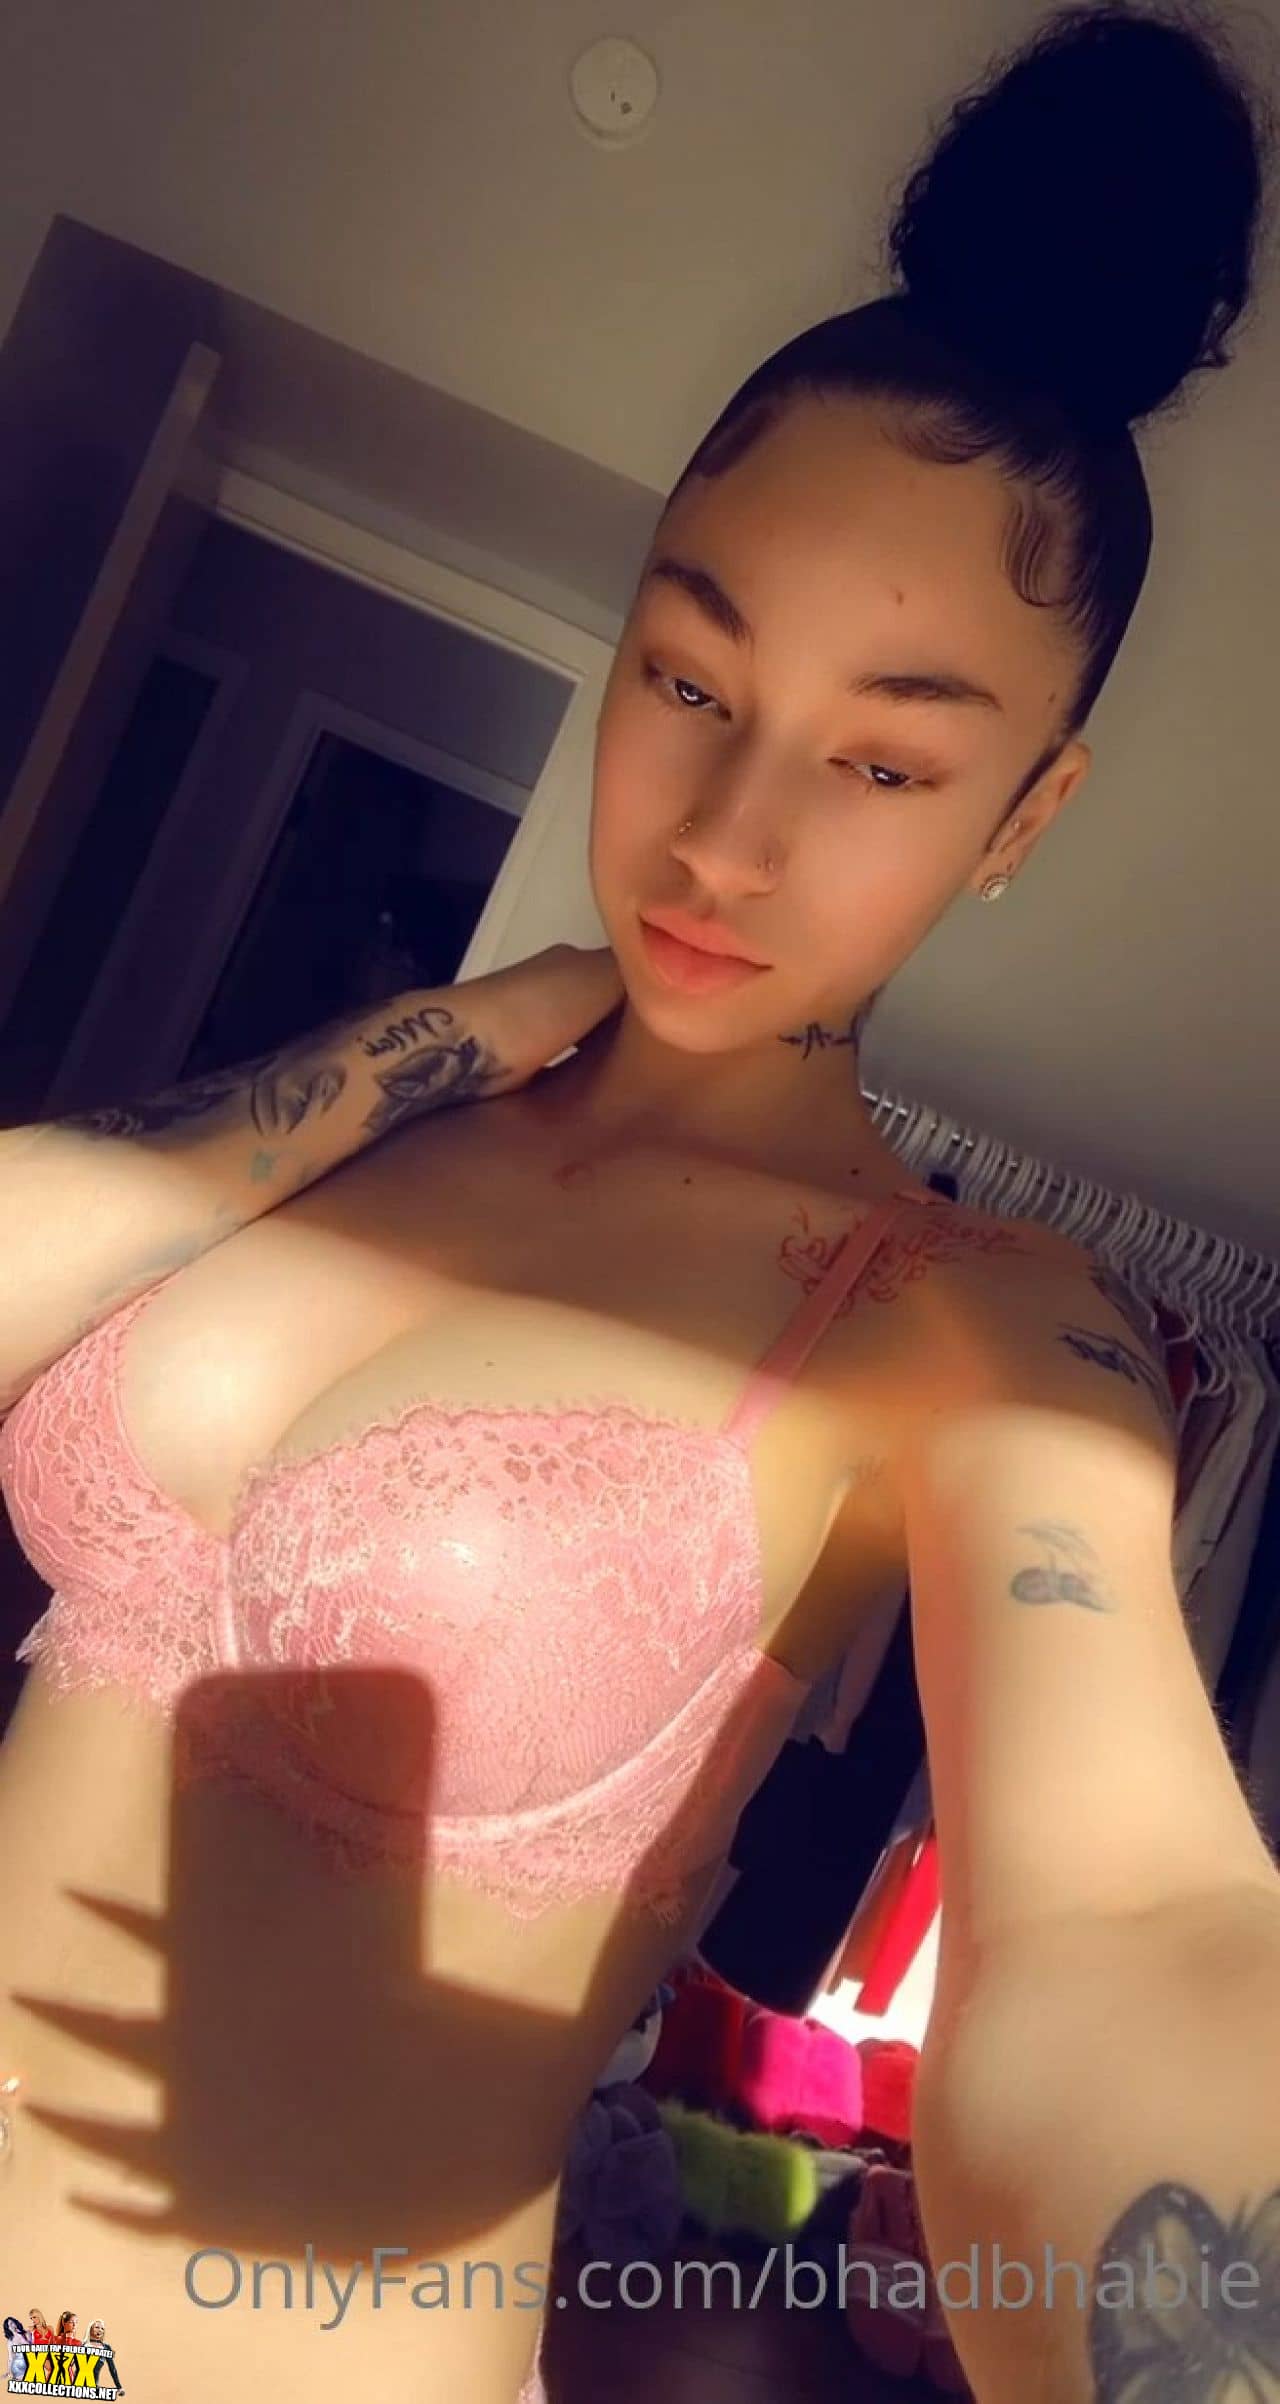 Bhad bhabie leaked onlyfans september